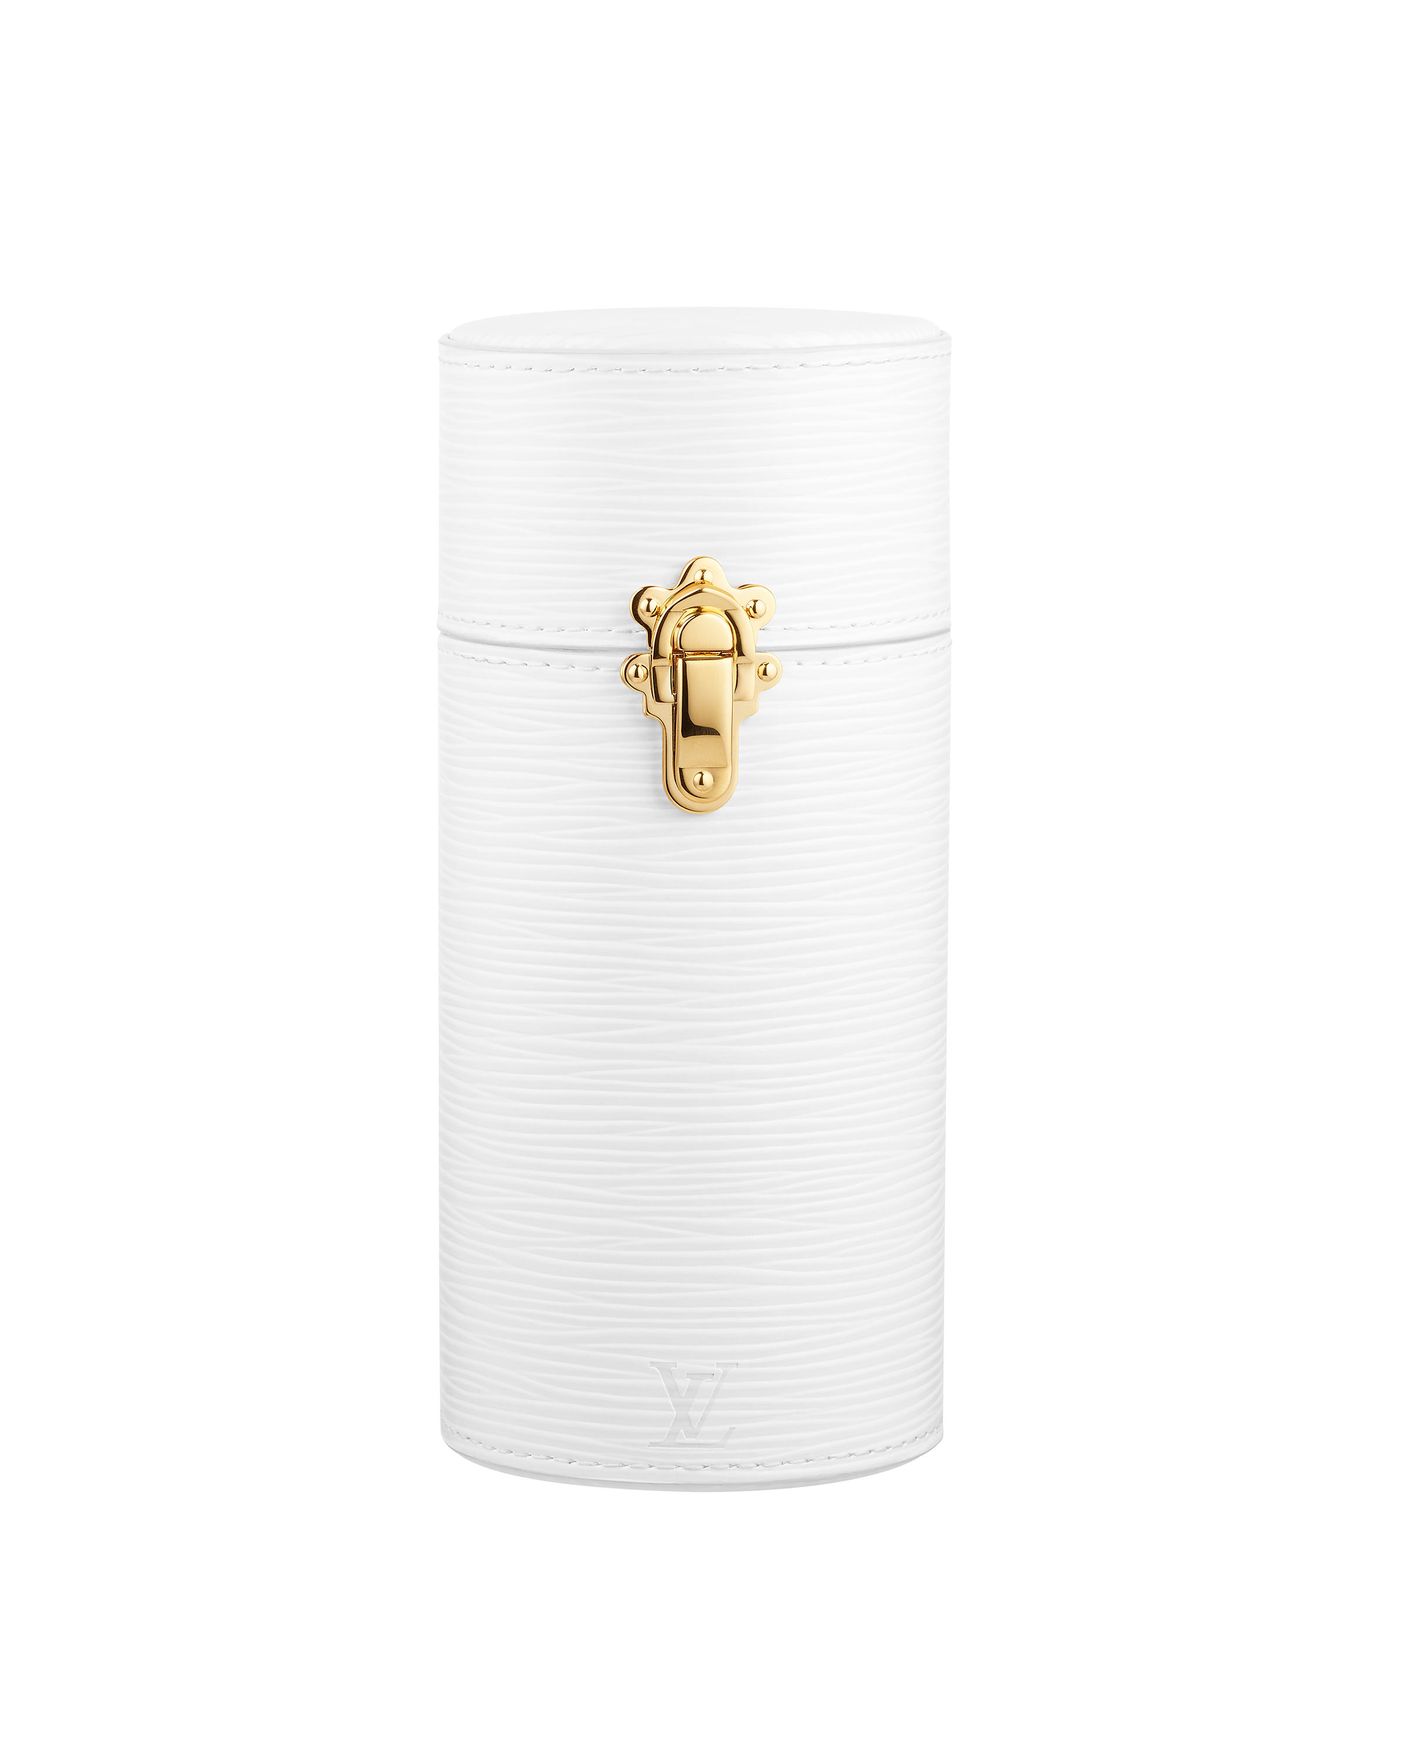 Louis Vuitton Fragrance Travel Case and Engraved Perfume 